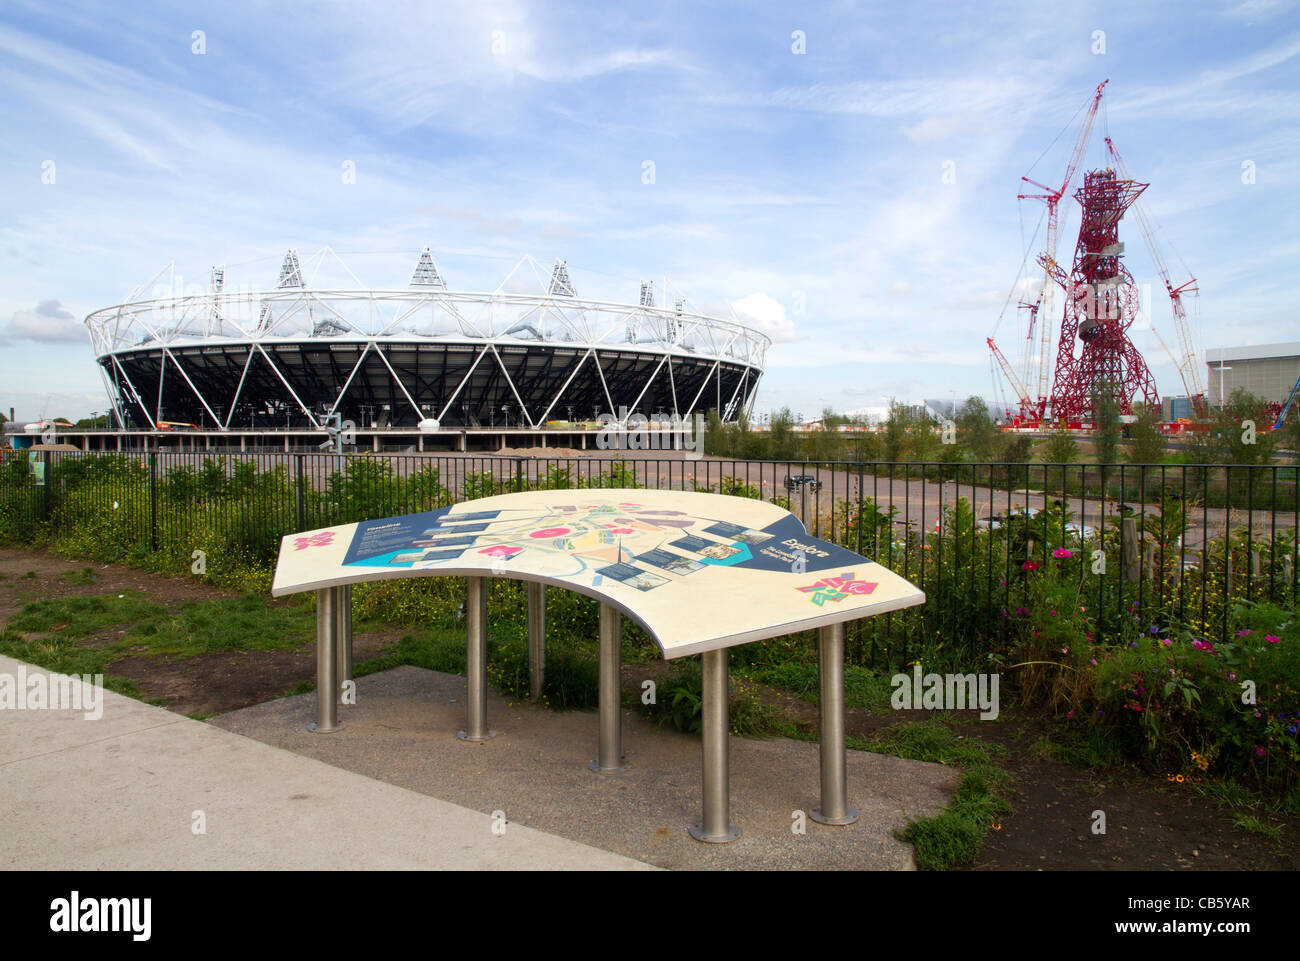 The London 2012 Olympic stadium, the ArcelorMittal Orbit observation tower and site map in the Olympic Park in Stratford, London Stock Photo